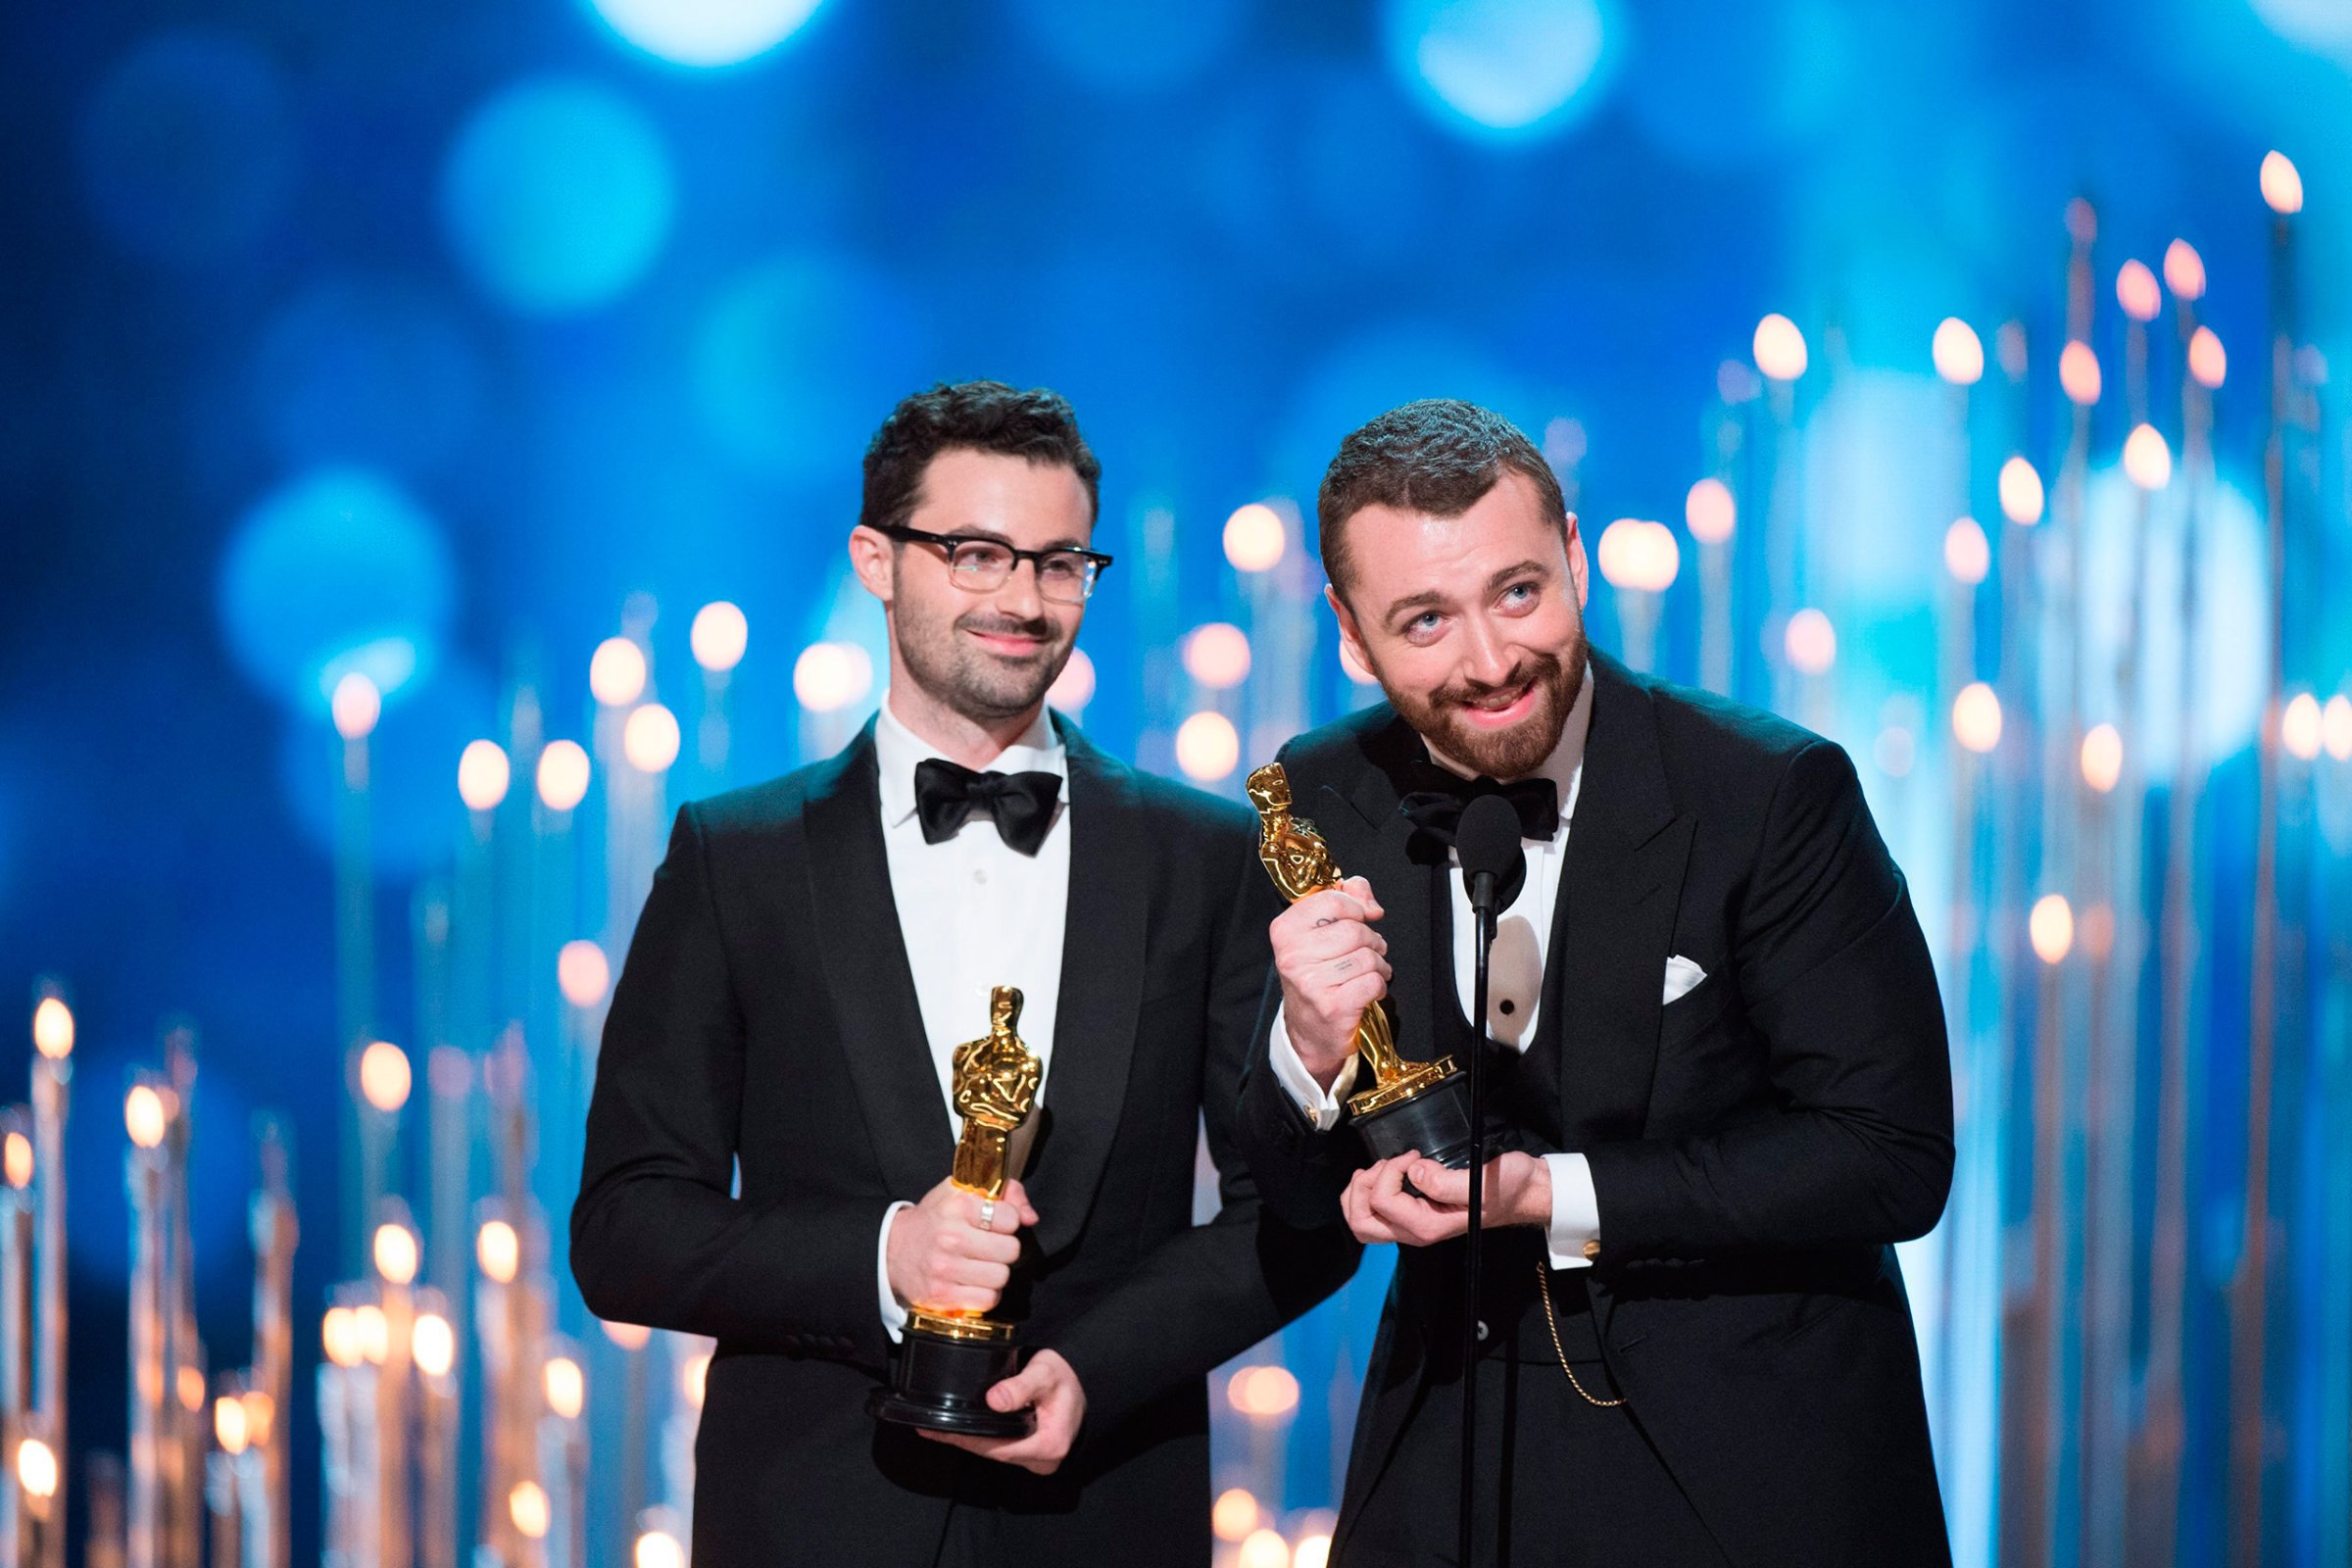 A handout image provided by the Academy of Motion Picture Arts and Science shows Jimmy Napes (left) and Sam Smith (right) accepting the Oscar for Best Original Song for "Writing's On The Wall" from SPECTRE during the 88th annual Academy Awards ceremony at the Dolby Theatre in Hollywood, Calif., Feb. 28, 2016.